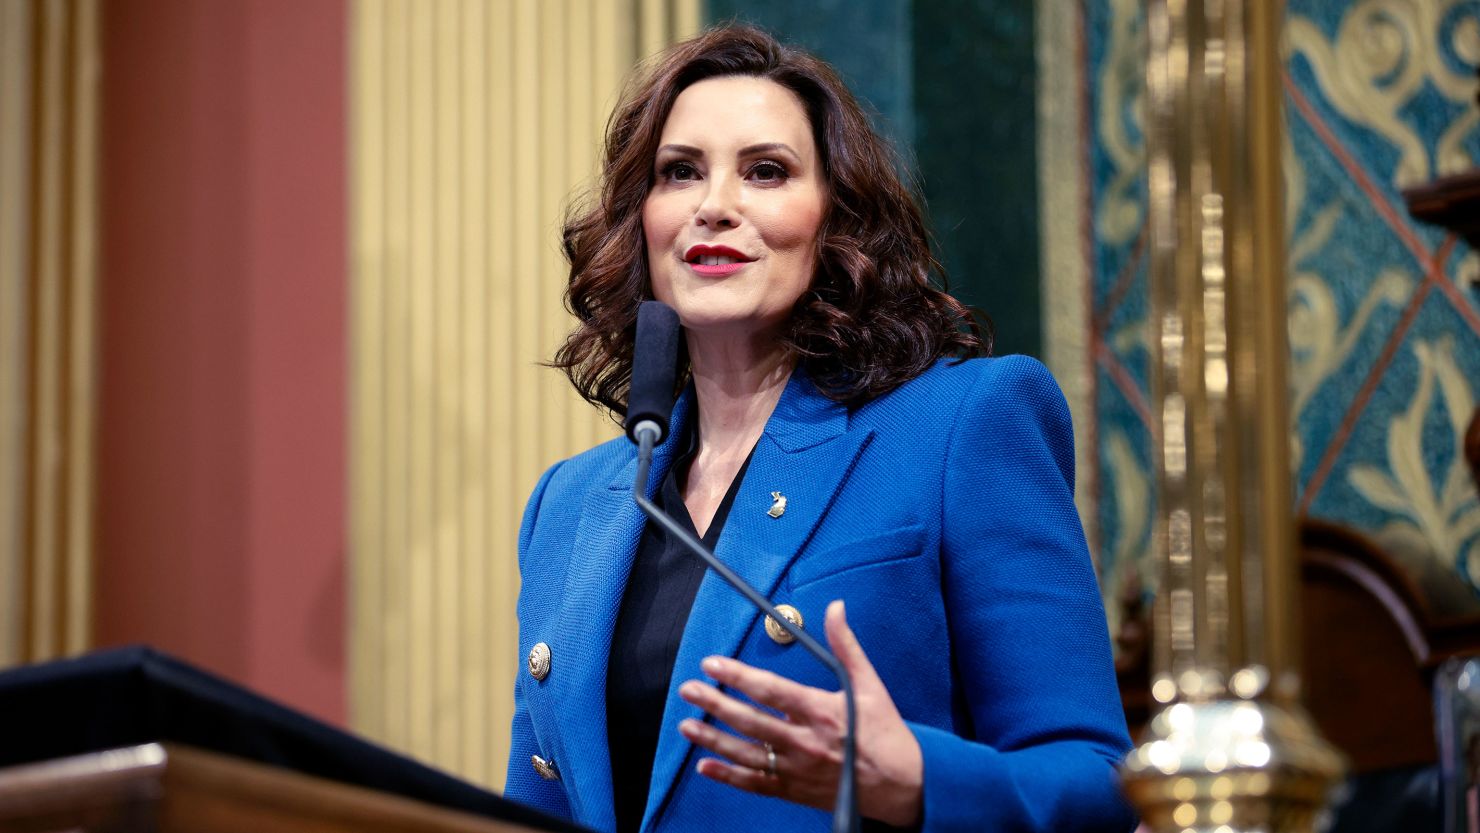 Michigan Gov. Gretchen Whitmer delivers her State of the State address to a joint session of the House and Senate, Jan. 25, 2023, at the state Capitol in Lansing, Michigan.